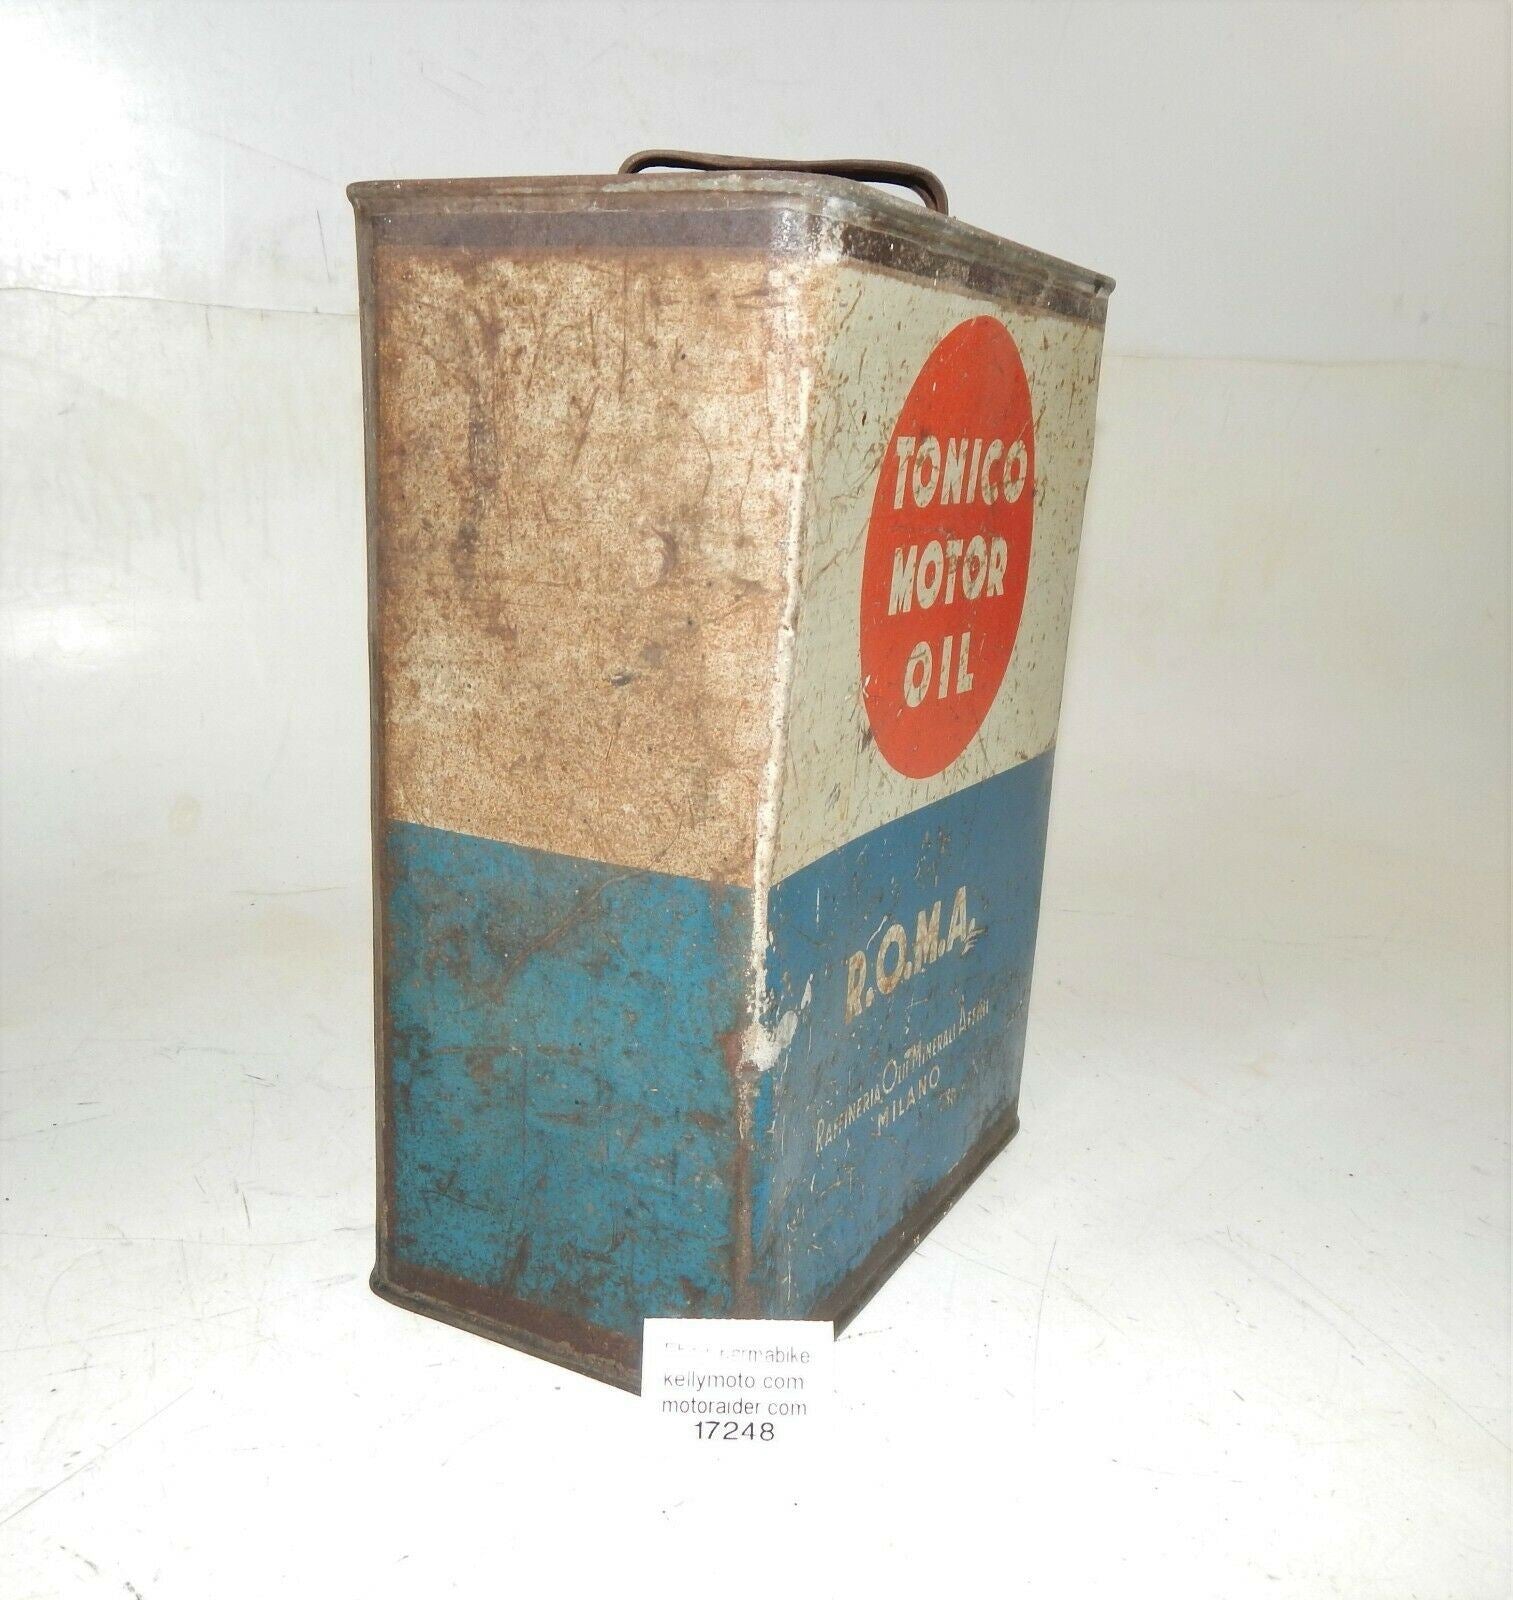 1960's TONICO MOTOR OIL R.O.M.A. CAN CONTAINER 1 GAL TIN 10x7.75x4.5" ITALY - MotoRaider